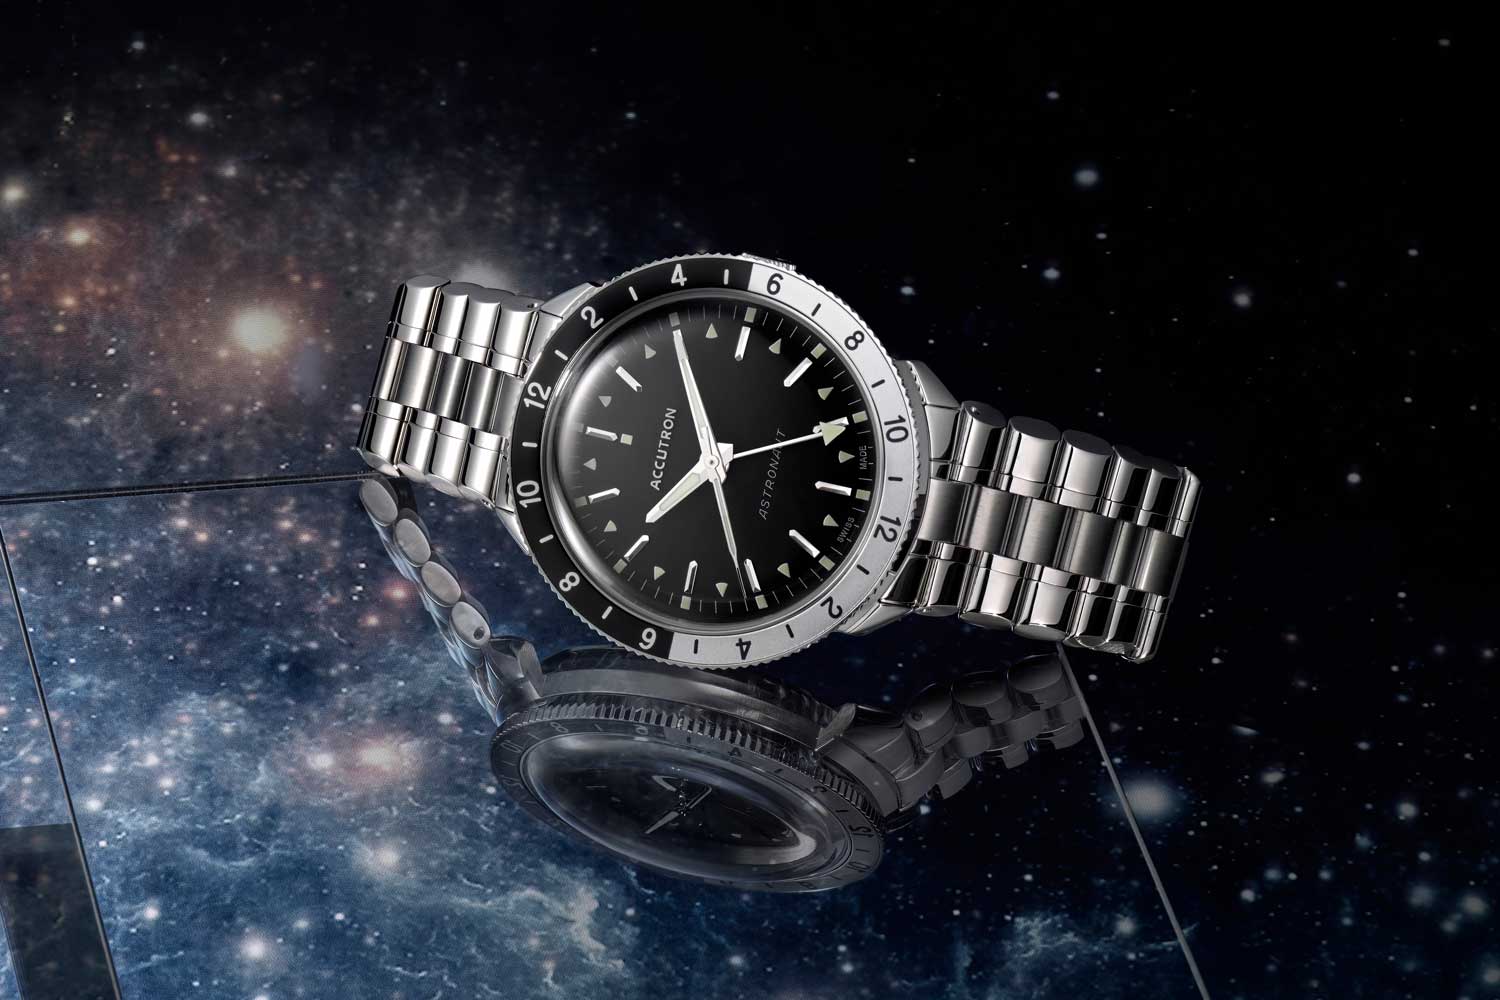 Accutron Astronaut GMT Limited Edition